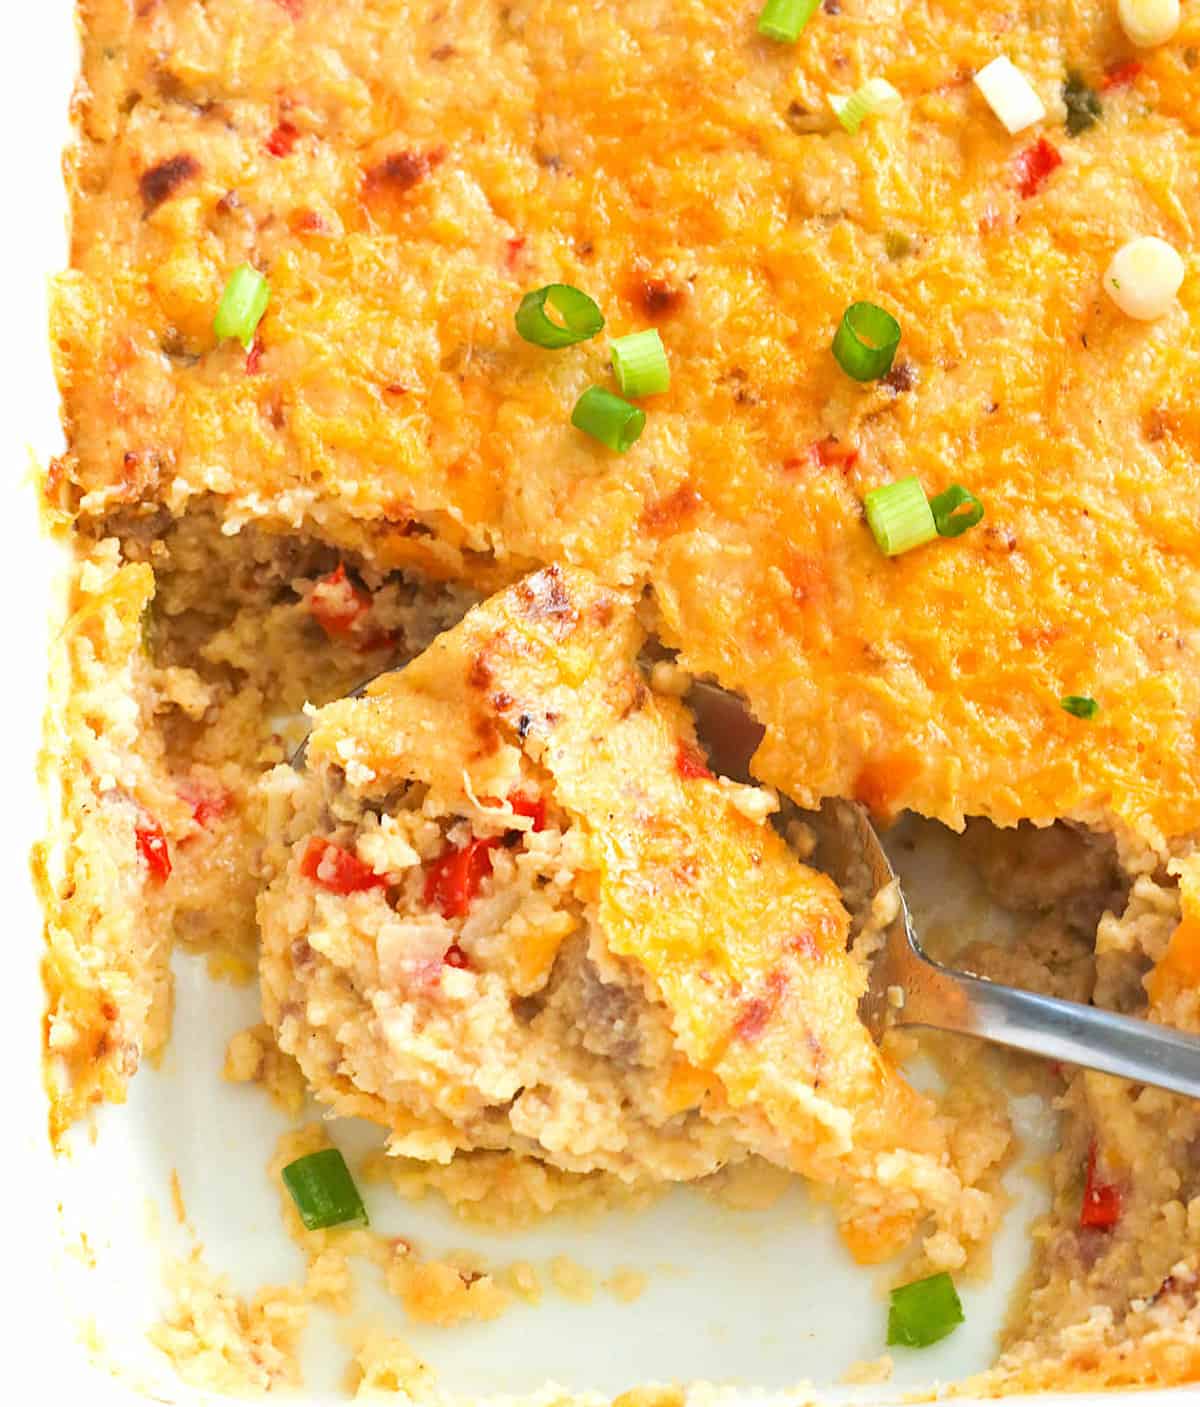 Grateful offer of cheesy grits casserole